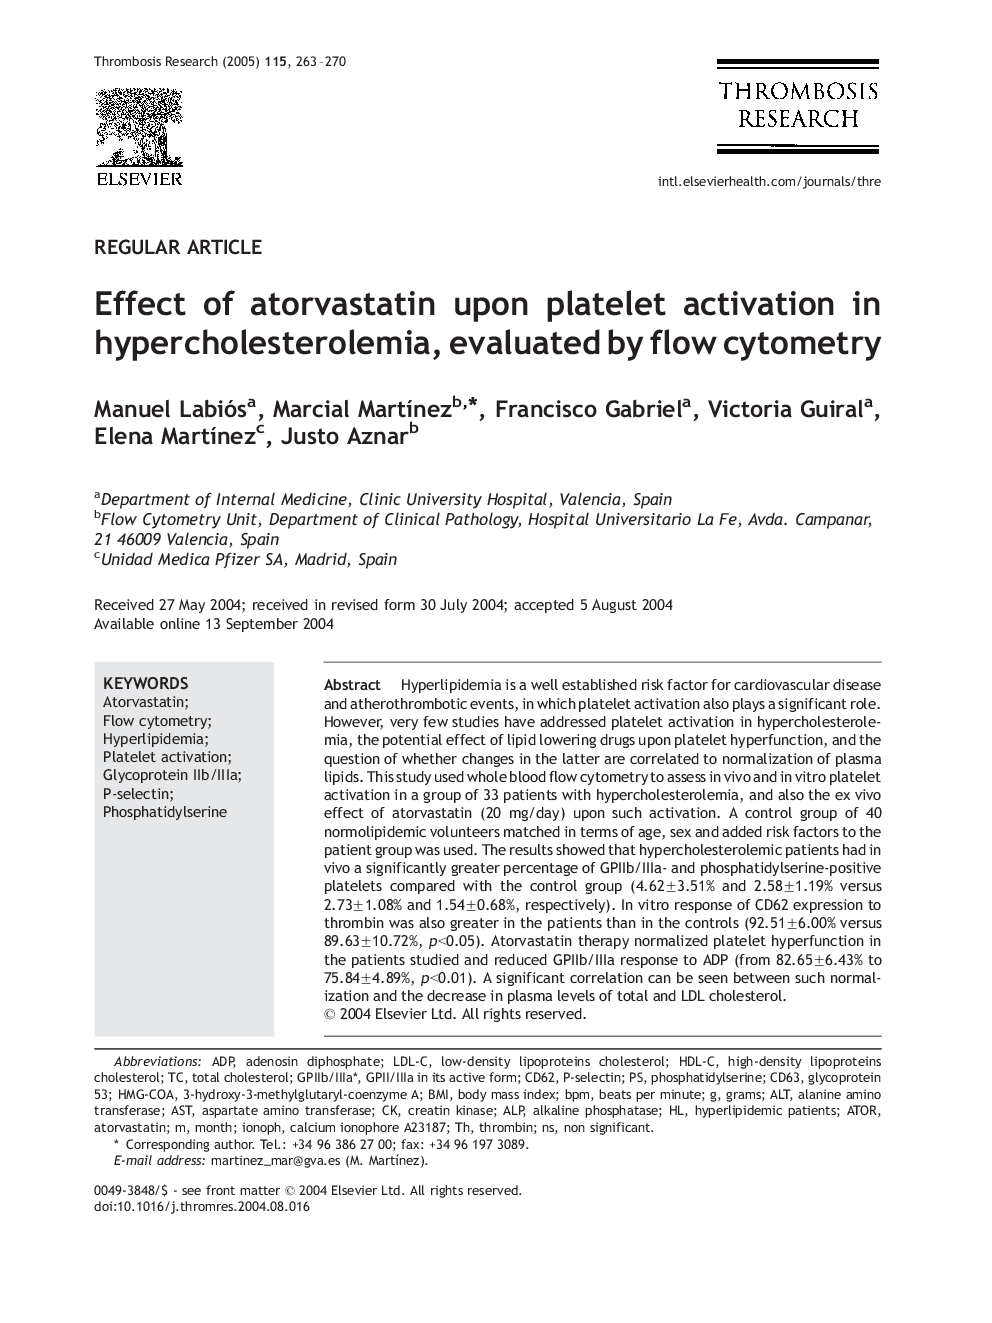 Effect of atorvastatin upon platelet activation in hypercholesterolemia, evaluated by flow cymetry